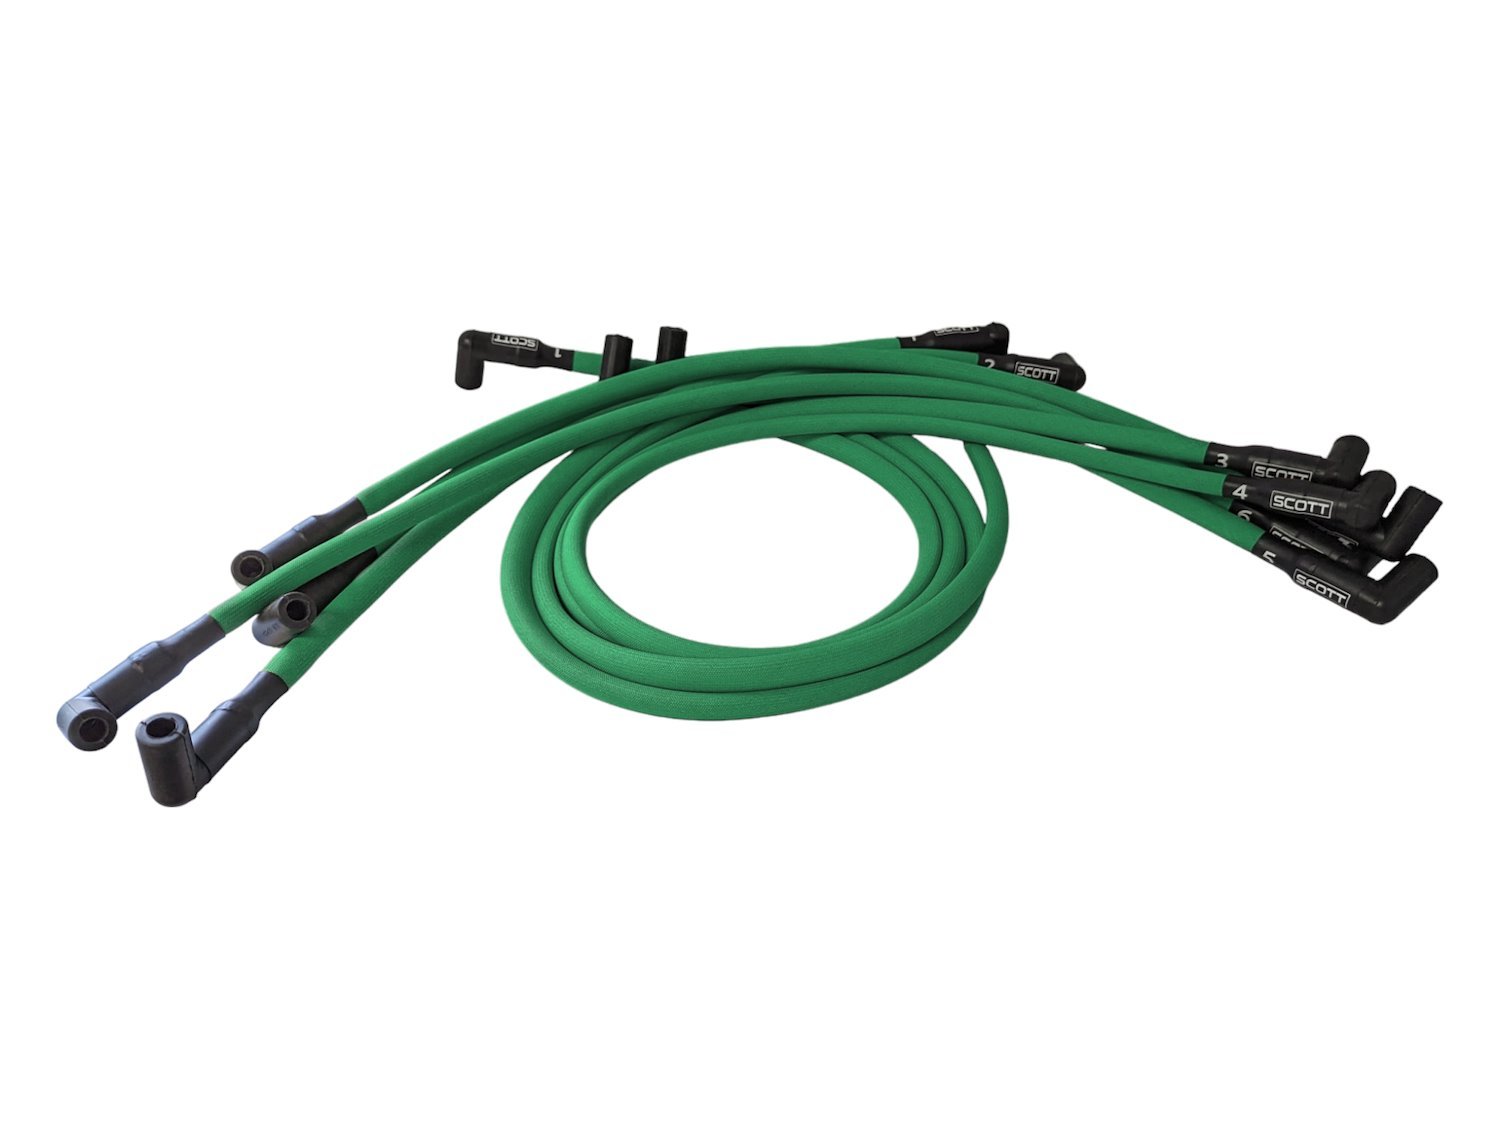 SPW-PS-516-4 High-Performance Fiberglass-Oversleeved Spark Plug Wire Set for Big Block Chevy Dragster, Under Header [Green]